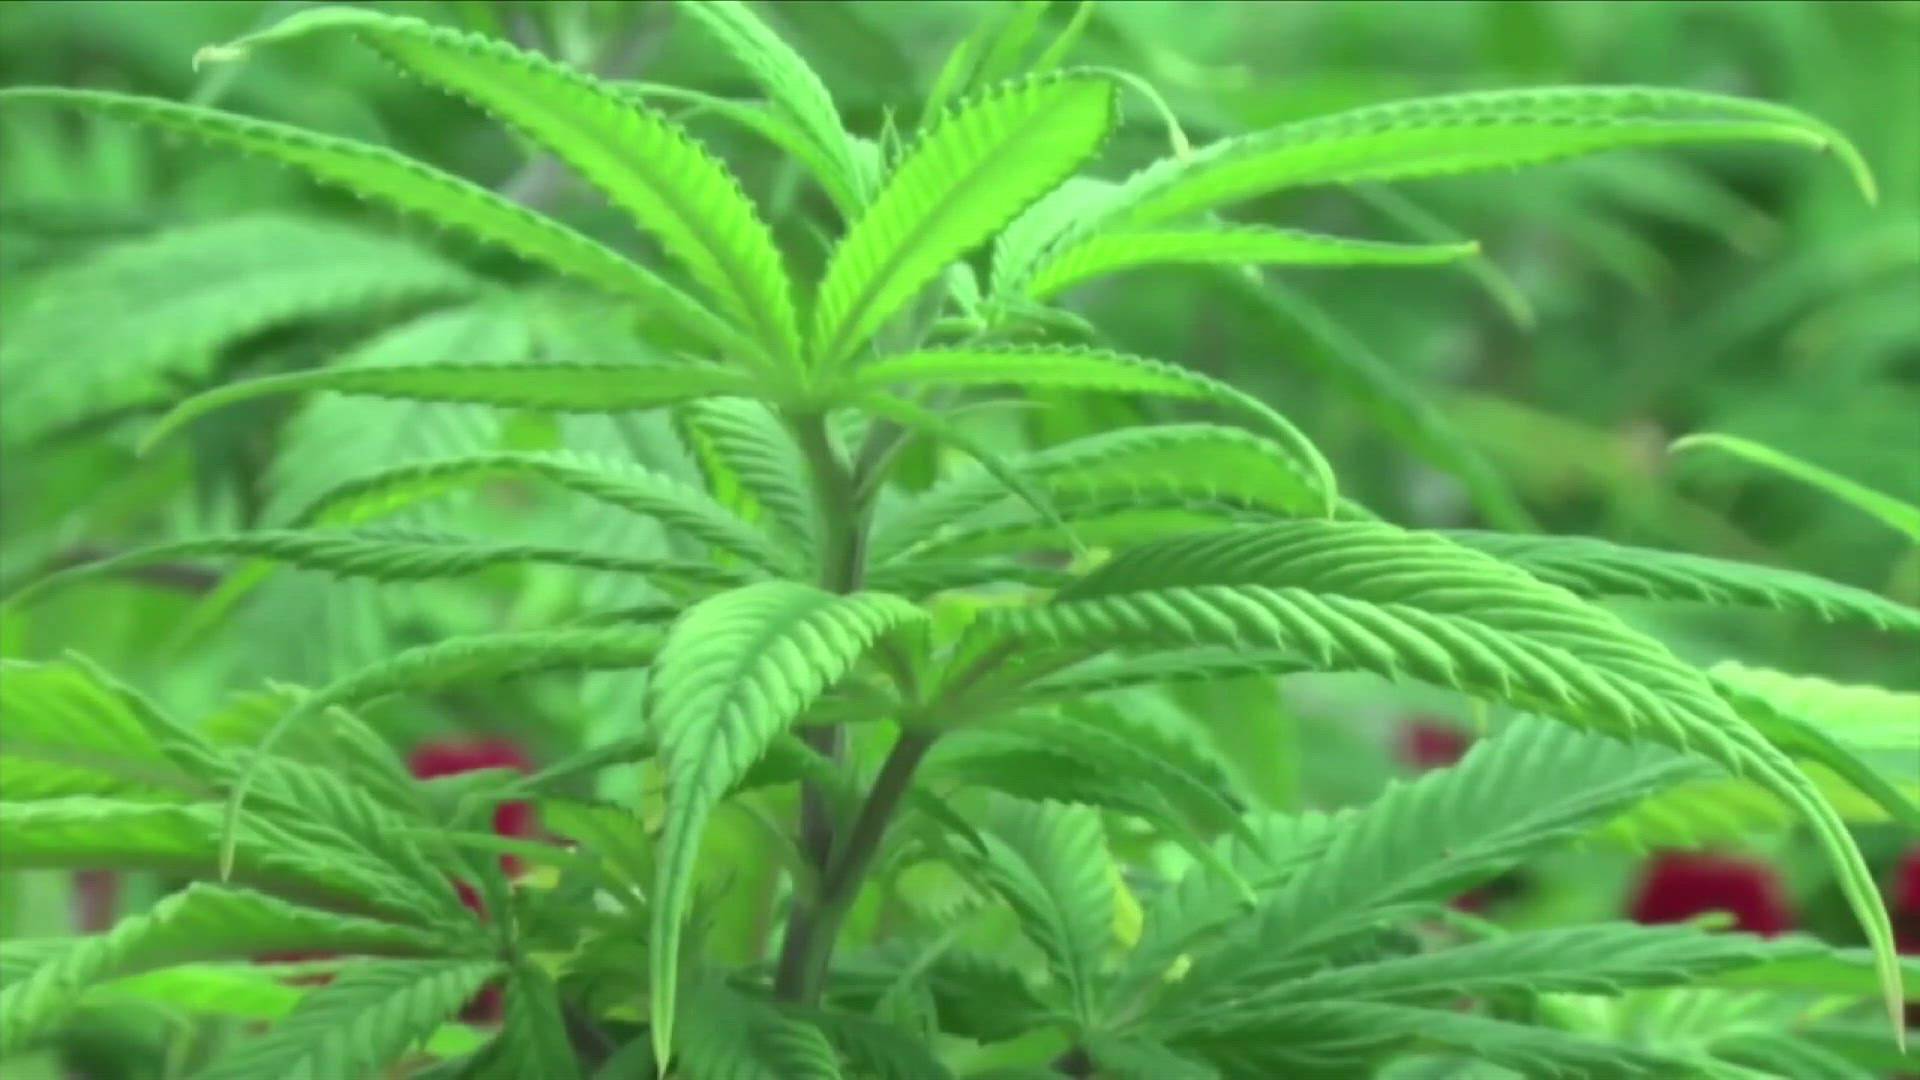 A few new laws are set to take effect on the first of July in the state of Tennessee.